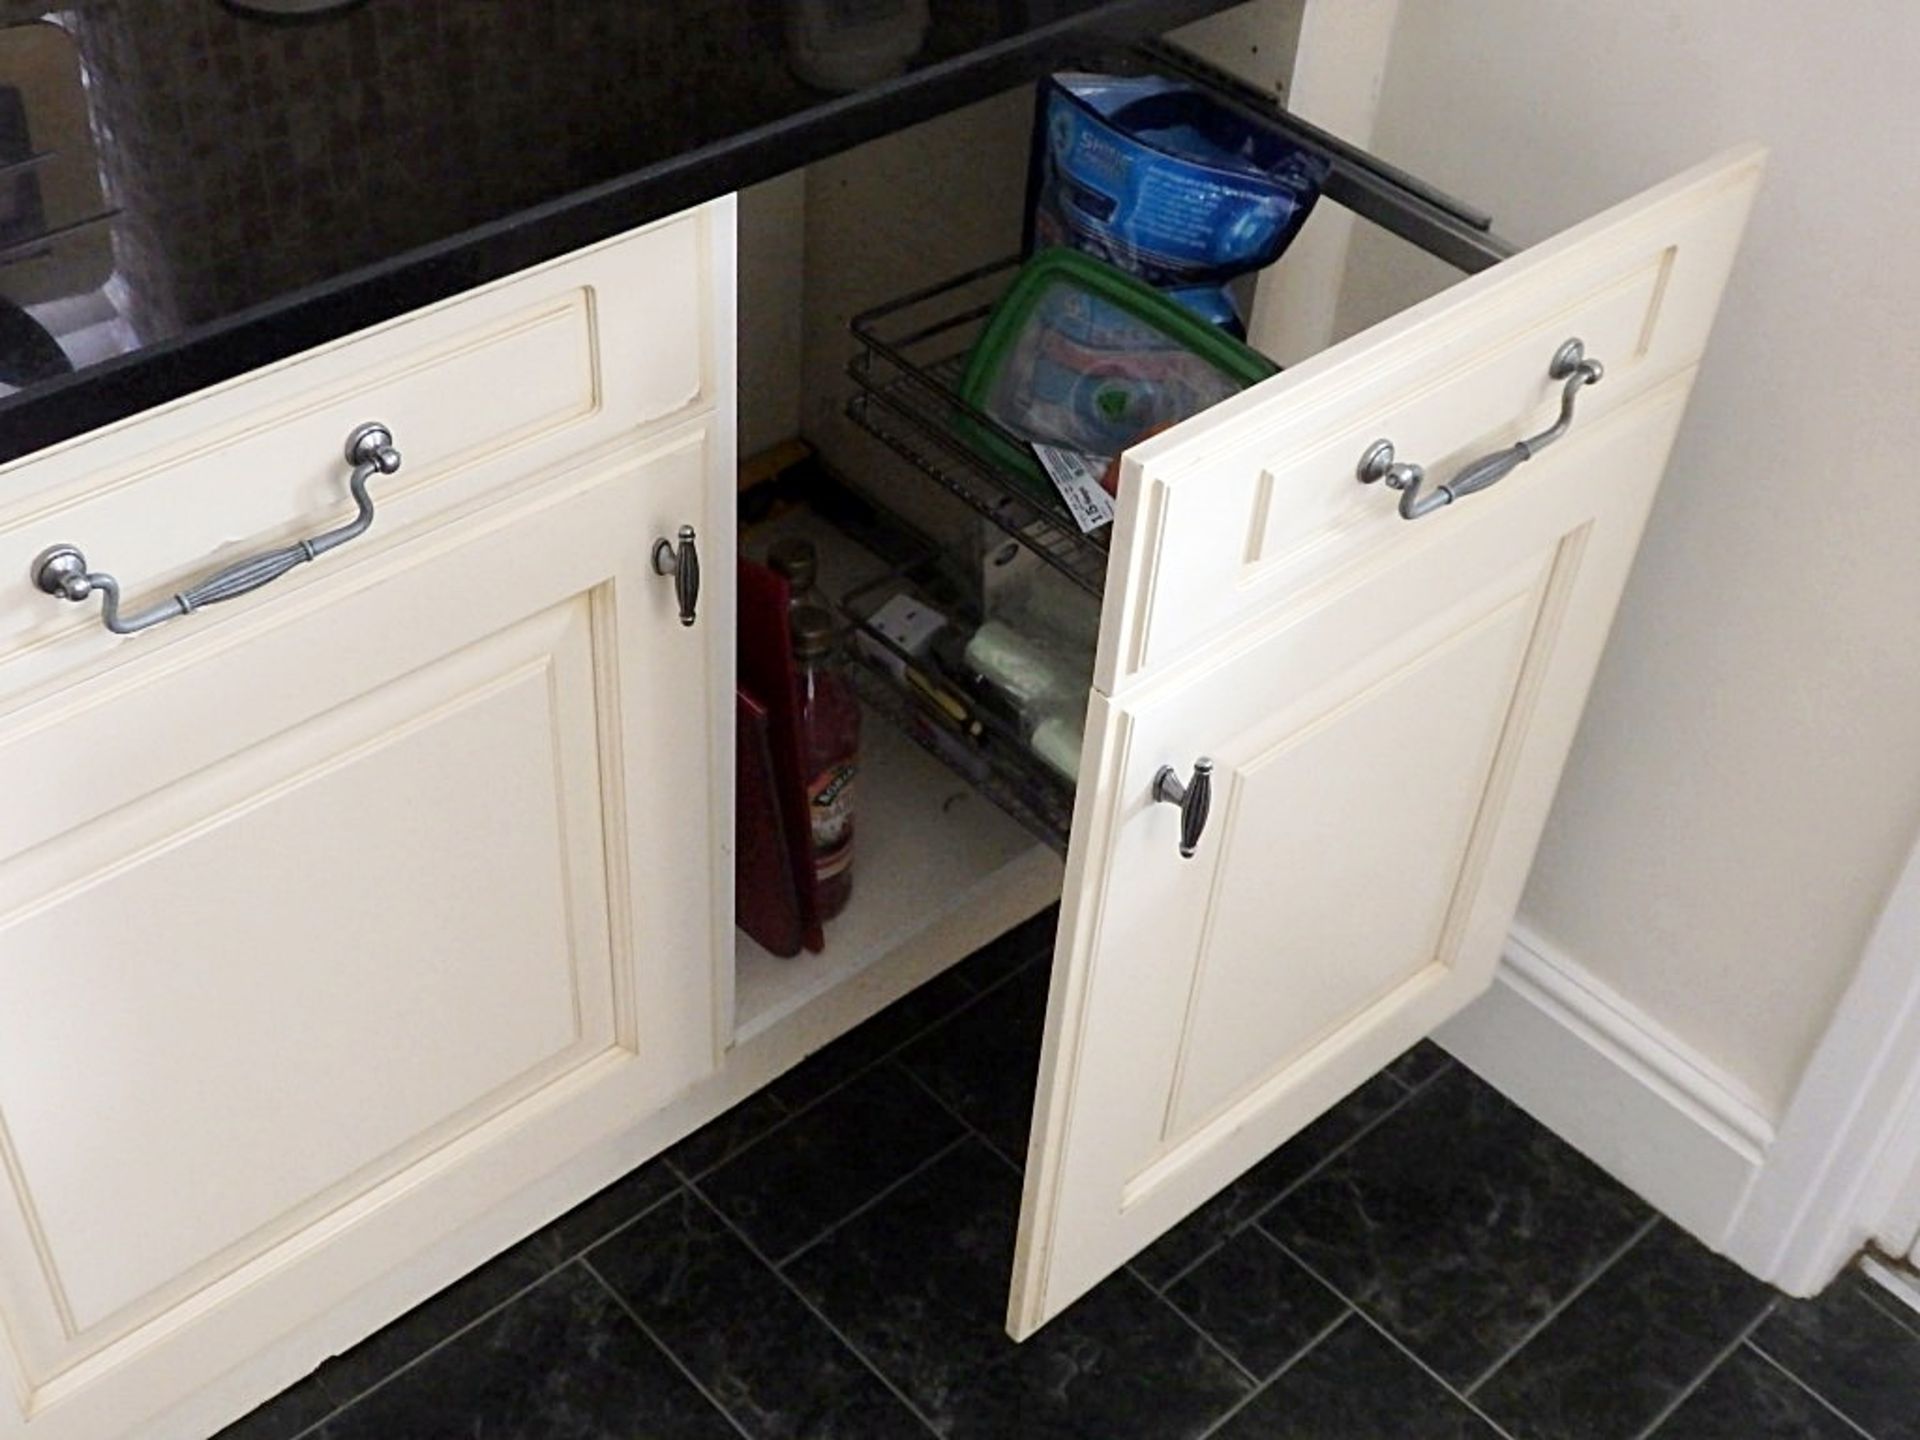 1 x Traditional Style Cream Kitchen With Luxurious Black Granite Worktops - Includes Freezer & - Image 9 of 31